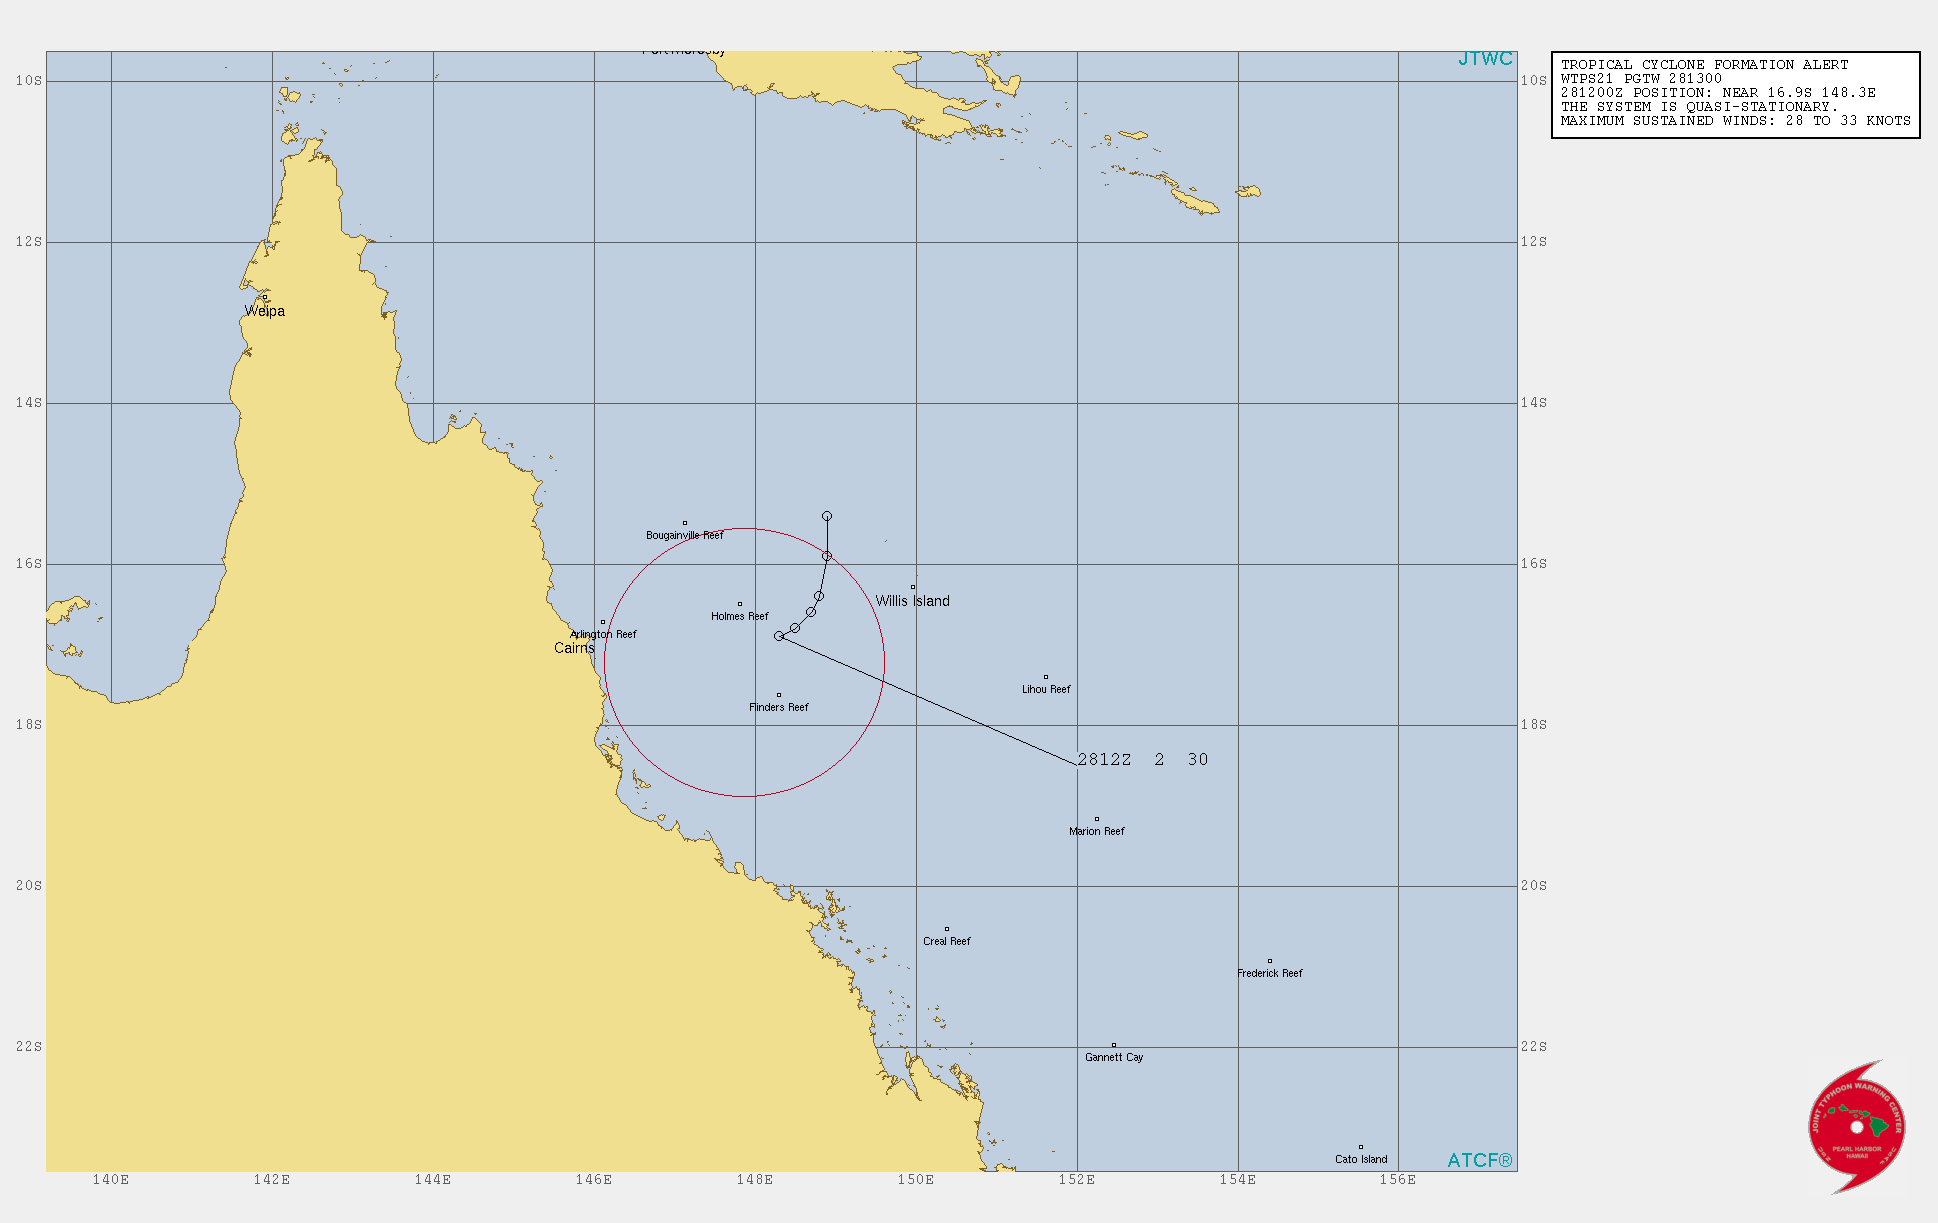 INVEST 99P. TCFA. FORMATION OF A SIGNIFICANT TROPICAL CYCLONE IS POSSIBLE WITHIN A 100 NM RADIUS OF 17.2S 147.9E WITHIN THE NEXT 12 TO 24 HOURS. AVAILABLE DATA DOES NOT JUSTIFY ISSUANCE OF NUMBERED TROPICAL CYCLONE WARNINGS AT THIS TIME. WINDS IN THE AREA ARE ESTIMATED TO BE 28 TO 33 KNOTS. METSAT IMAGERY AT 280600Z INDICATES THAT A CIRCULATION CENTER IS LOCATED NEAR 17.1S 148.2E. THE SYSTEM IS QUASI-STATIONARY AT 02 KNOTS.THE AREA OF CONVECTION (INVEST 99P) PREVIOUSLY LOCATED  NEAR 16.9S 148.5E IS NOW LOCATED NEAR 17.1S 148.2E, APPROXIMATELY  140 NM EAST OF CAIRNS, AUSTRALIA. ANIMATED MULTISPECTRAL SATELLITE  IMAGERY, A COMPOSITE RADAR LOOP FROM WILLIS ISLAND, AND A 280702Z  SSMIS 91 GHZ MICROWAVE PASS REVEAL DISORGANIZED BANDING WRAPPING  INTO A LOW LEVEL CIRCULATION CENTER (LLCC) WITH FLARING CONVECTION  IN THE SOUTHERN PERIPHERY. A 281011Z ASCAT-A IMAGE DEPICTS A WELL  DEFINED LLCC WITH 30-35KT WINDS IN THE SOUTHWEST QUADRANT.  ENVIRONMENTAL ANALYSIS DEPICTS A FAVORABLE ENVIRONMENT WITH ROBUST  POLEWARD UPPER LEVEL OUTFLOW, LOW TO MODERATE (15-20KTS) VERTICAL  WIND SHEAR, AND WARM (29-30C) SEA SURFACE TEMPERATURES.